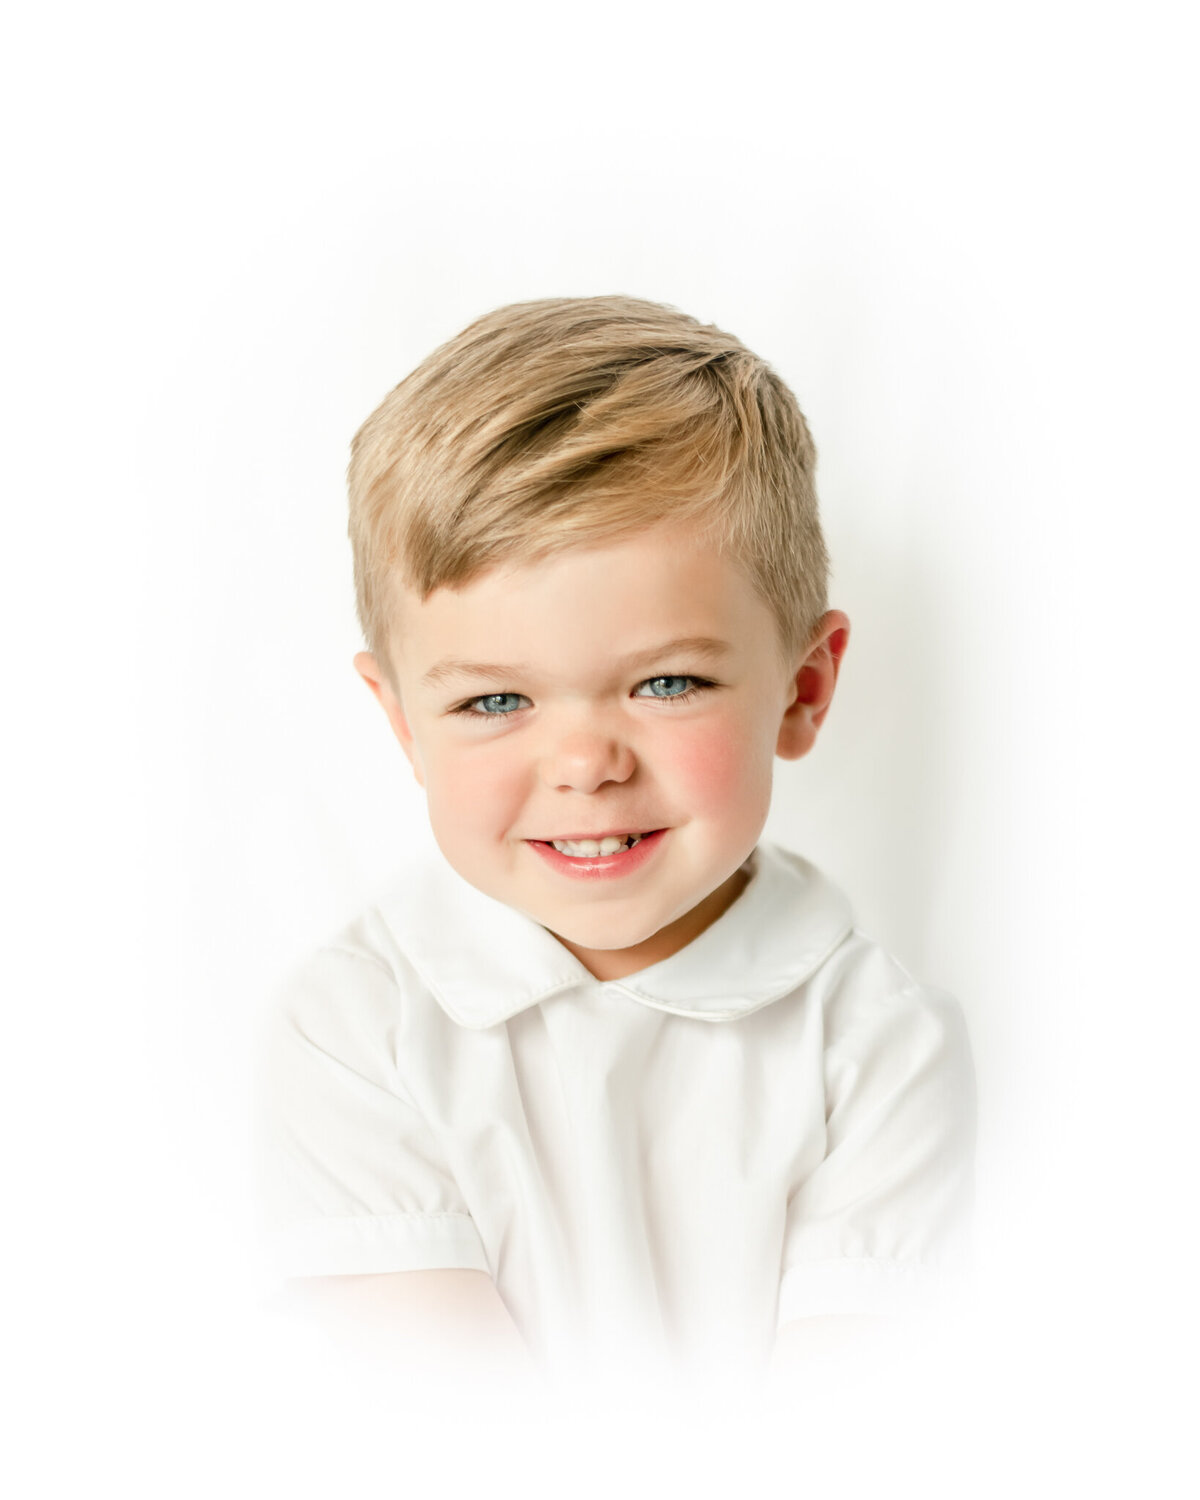 Vignetted portrait of a brown haired little boy